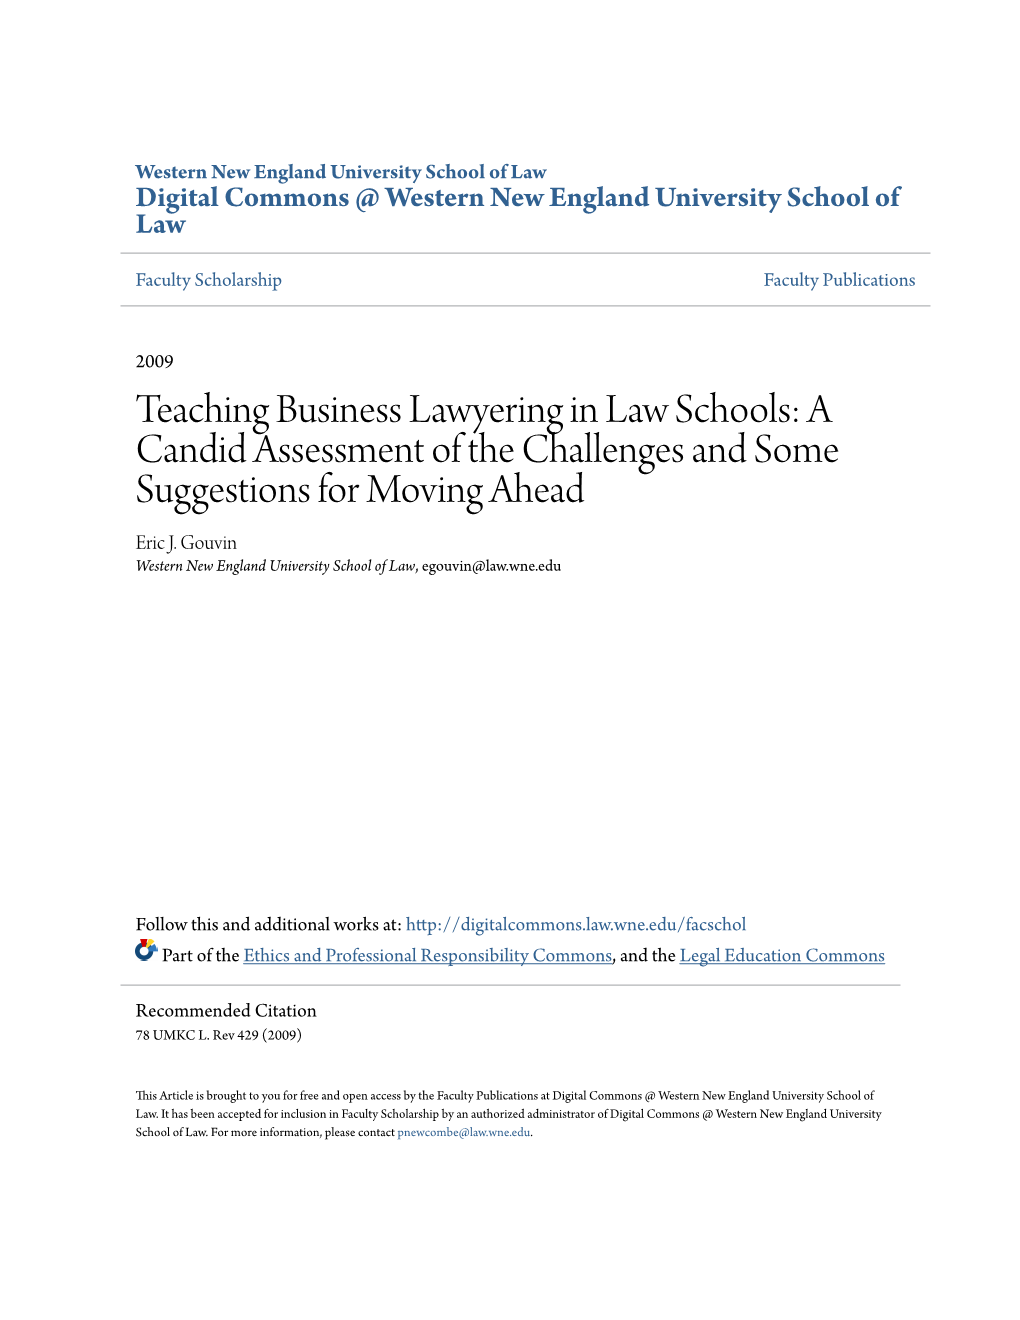 Teaching Business Lawyering in Law Schools: a Candid Assessment of the Challenges and Some Suggestions for Moving Ahead Eric J